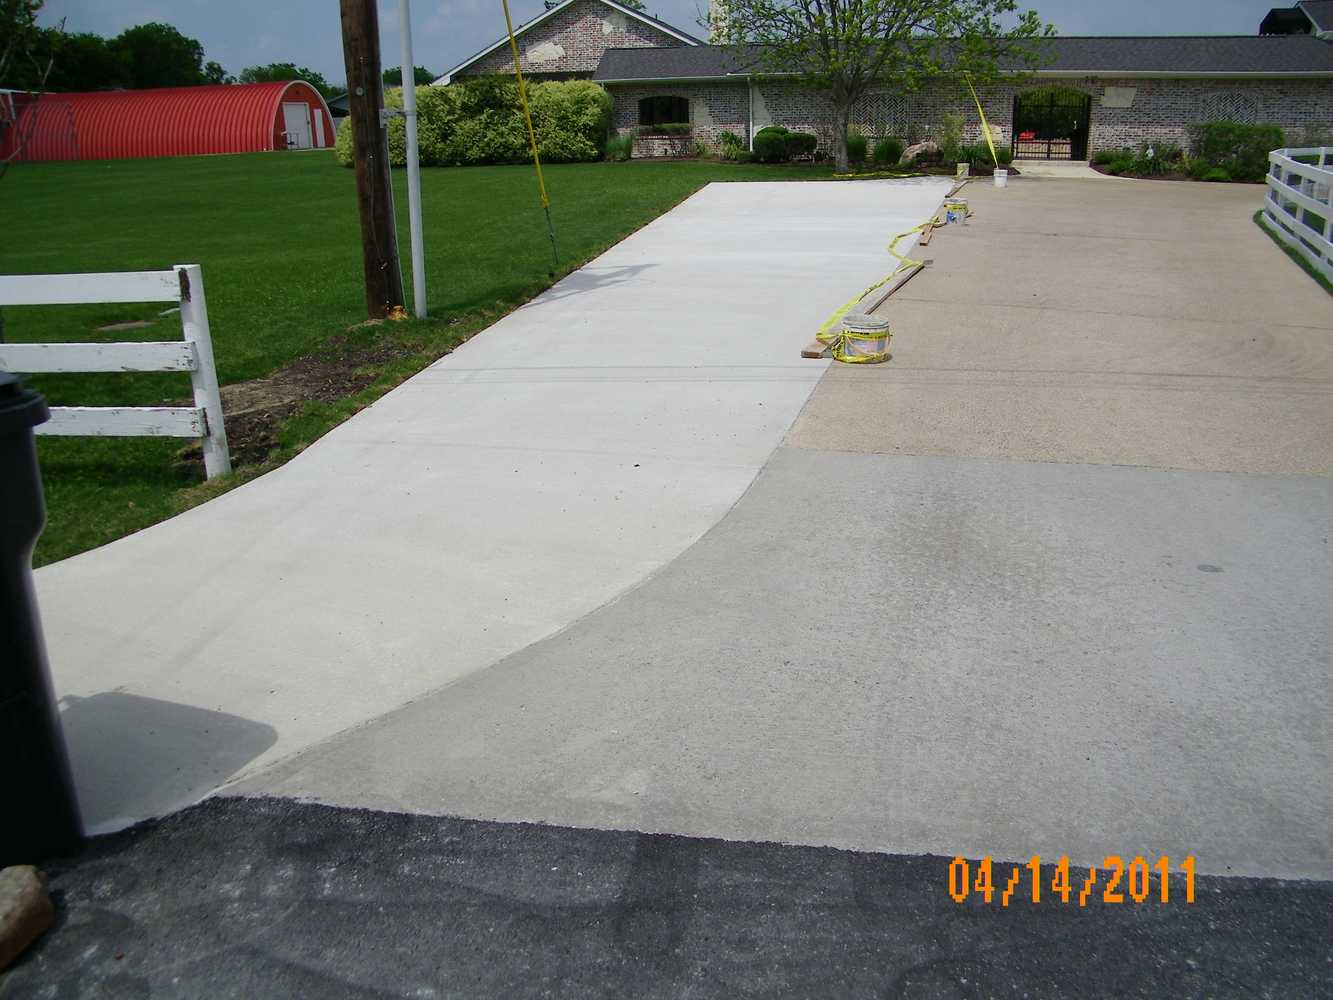 Photos from Concrete Repair Systems